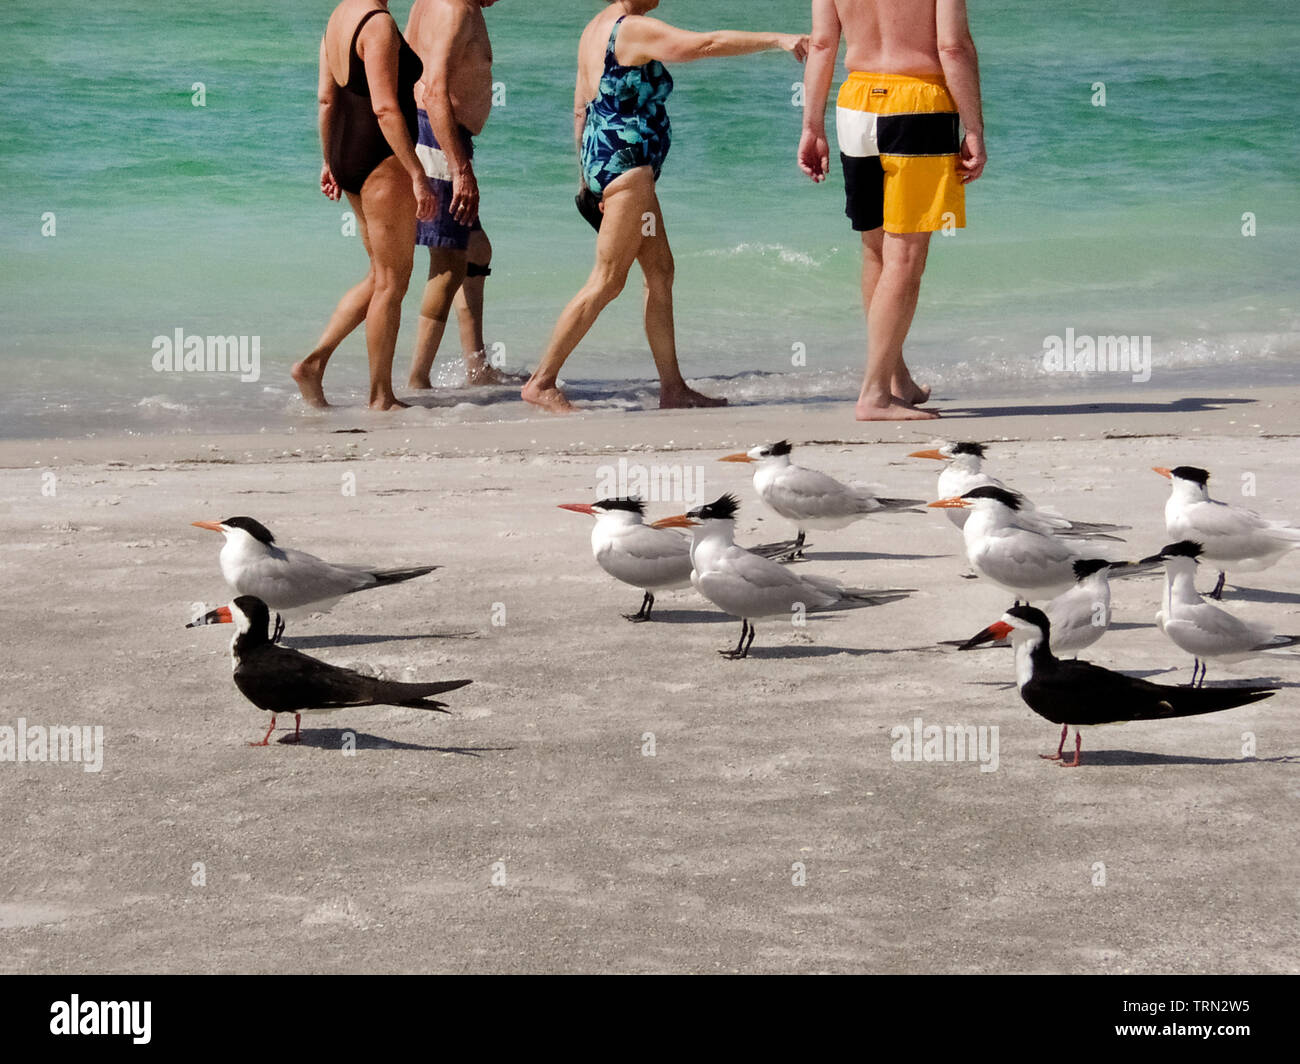 Several royal terns (Thalasseus maximus) and two black skimmers (Rynchops niger) rest on a sandy beach undisturbed by elderly tourists in swimsuits walking behind them in the tropical waters of the Gulf of Mexico along Longboat Key in Sarasota County, Florida, USA. Shorebirds and vacationers share many of the beaches that rim the1,350-mile (2,173-kilometer) coastline of the Sunshine State. Stock Photo